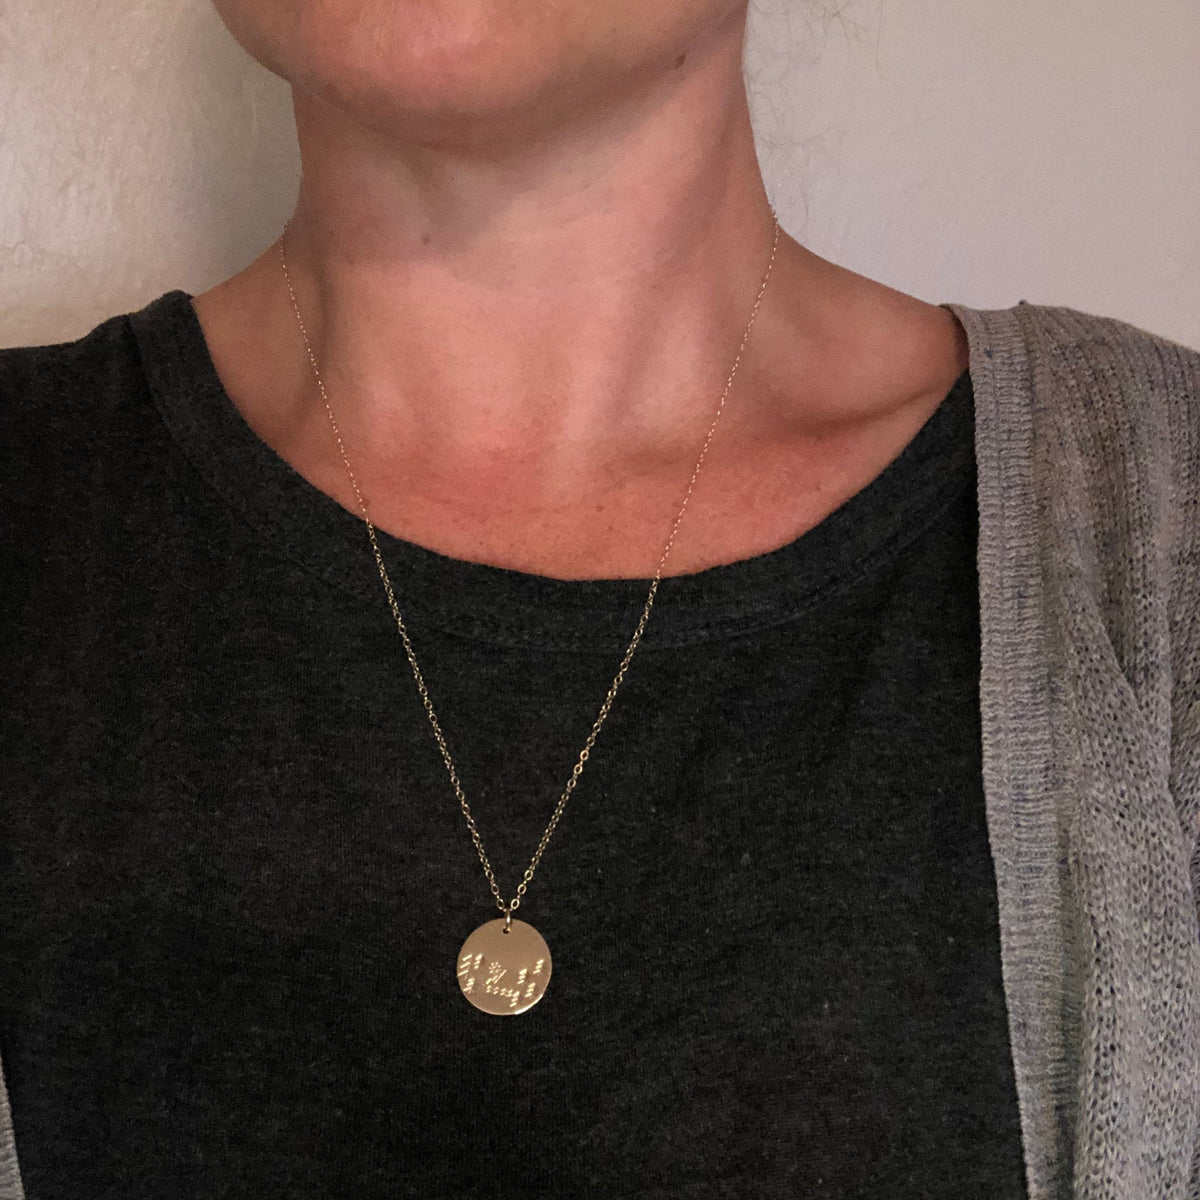 Moonlit Forest Hand Stamped Coin Necklace (WS)